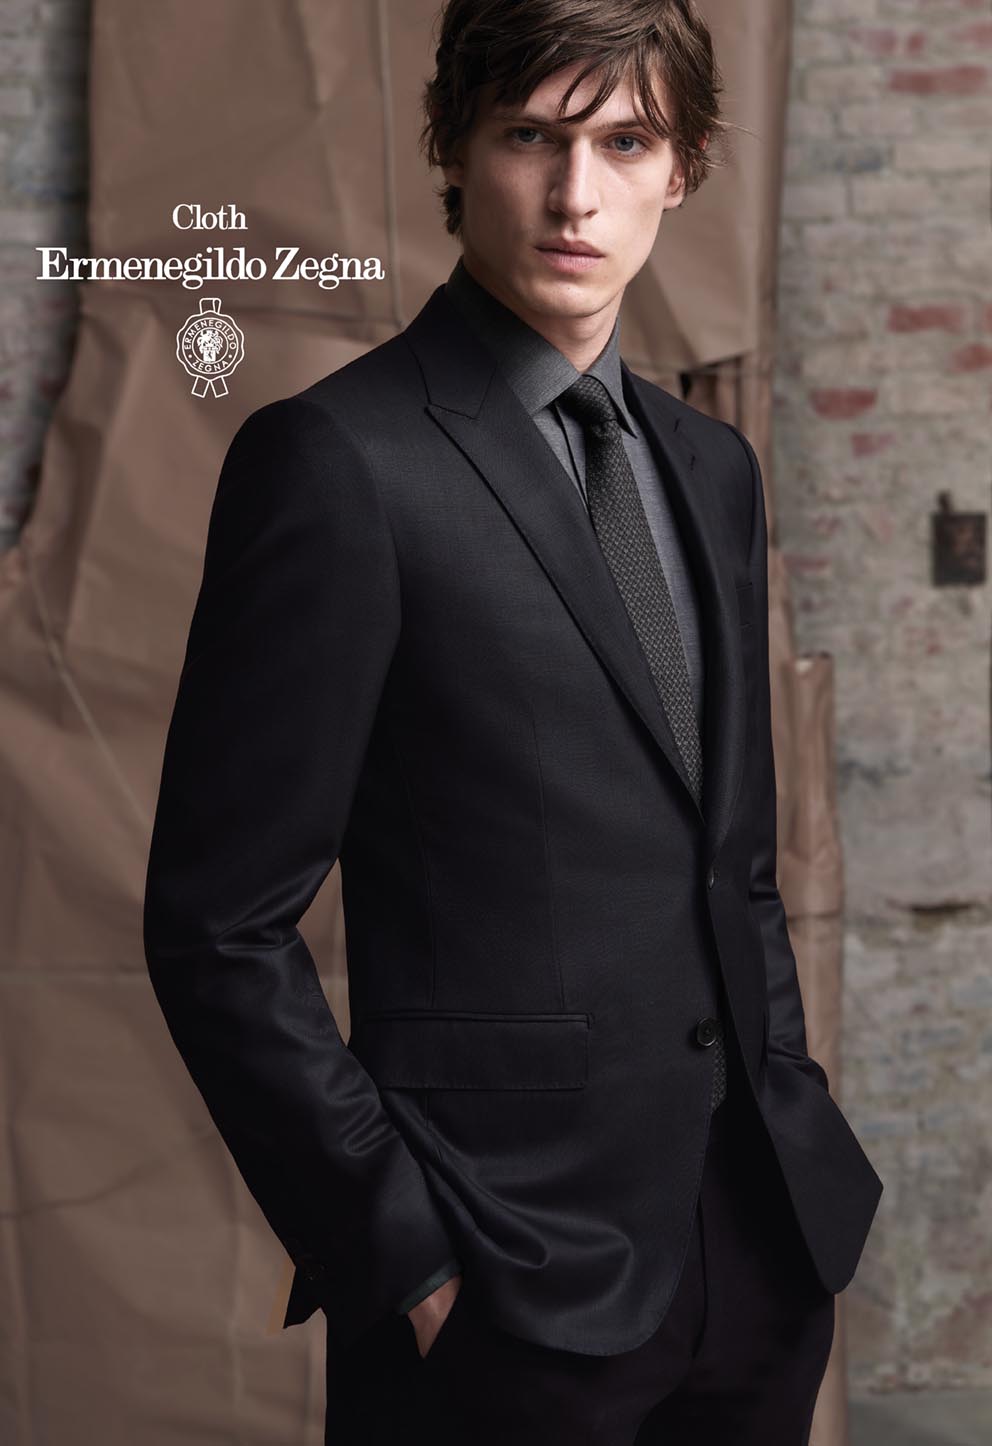 Stoff E. Zegna Herbst/Winter 2020 mit edler Anmutung